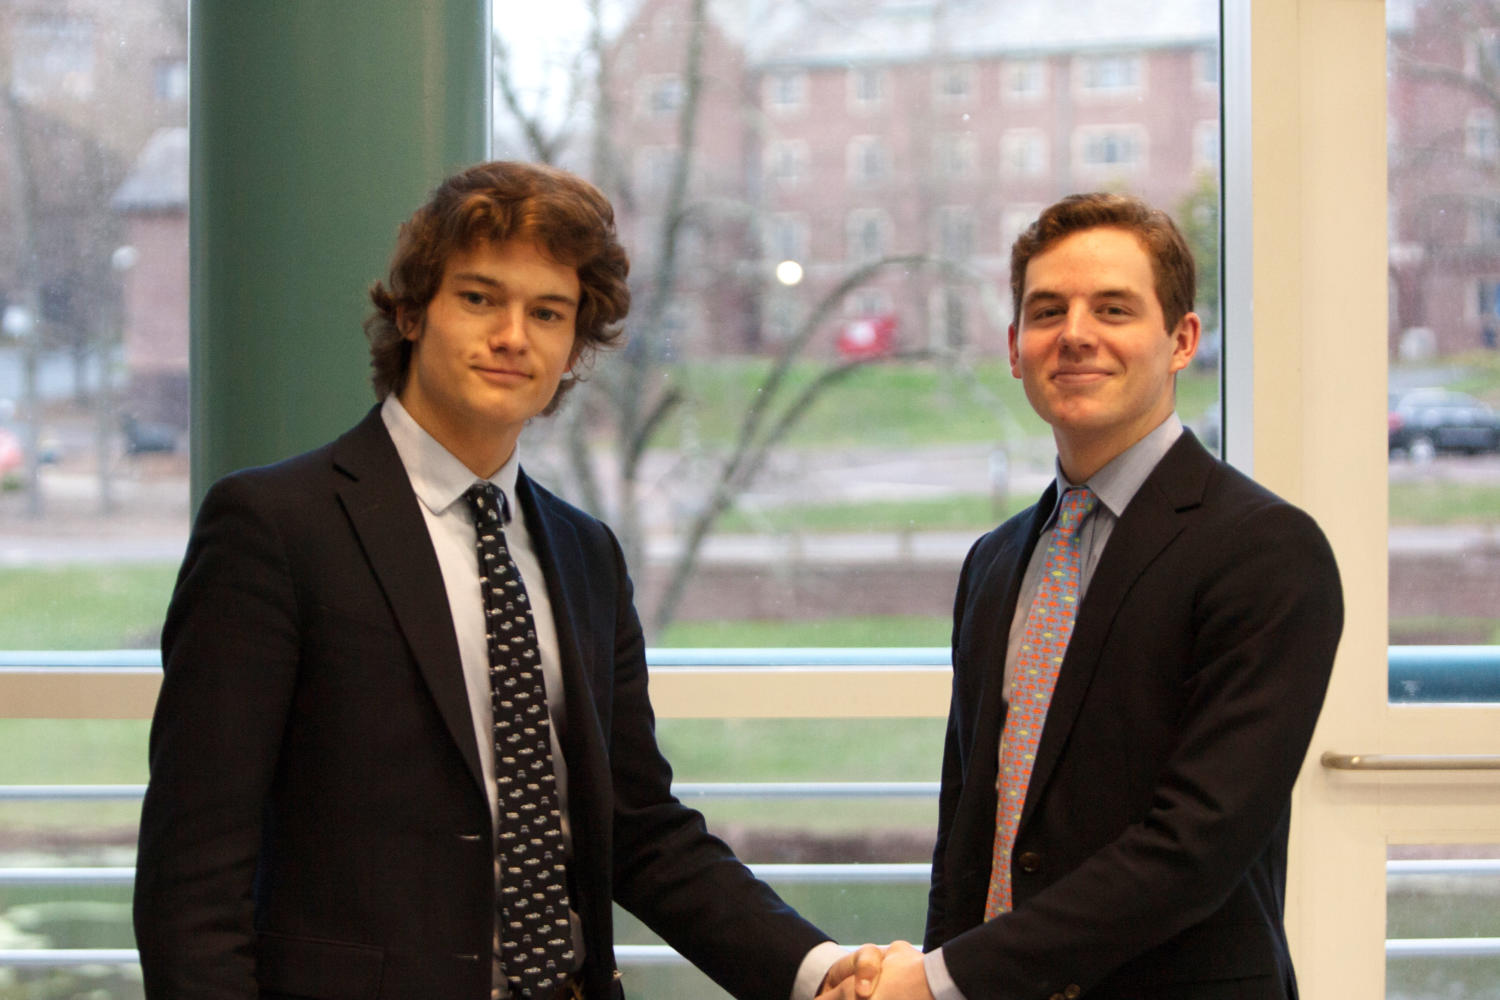 Garrett+George+%E2%80%9919+elected+SGA+President%2C+with+Max+Moore+%E2%80%9919++serving+as+the+Vice+President